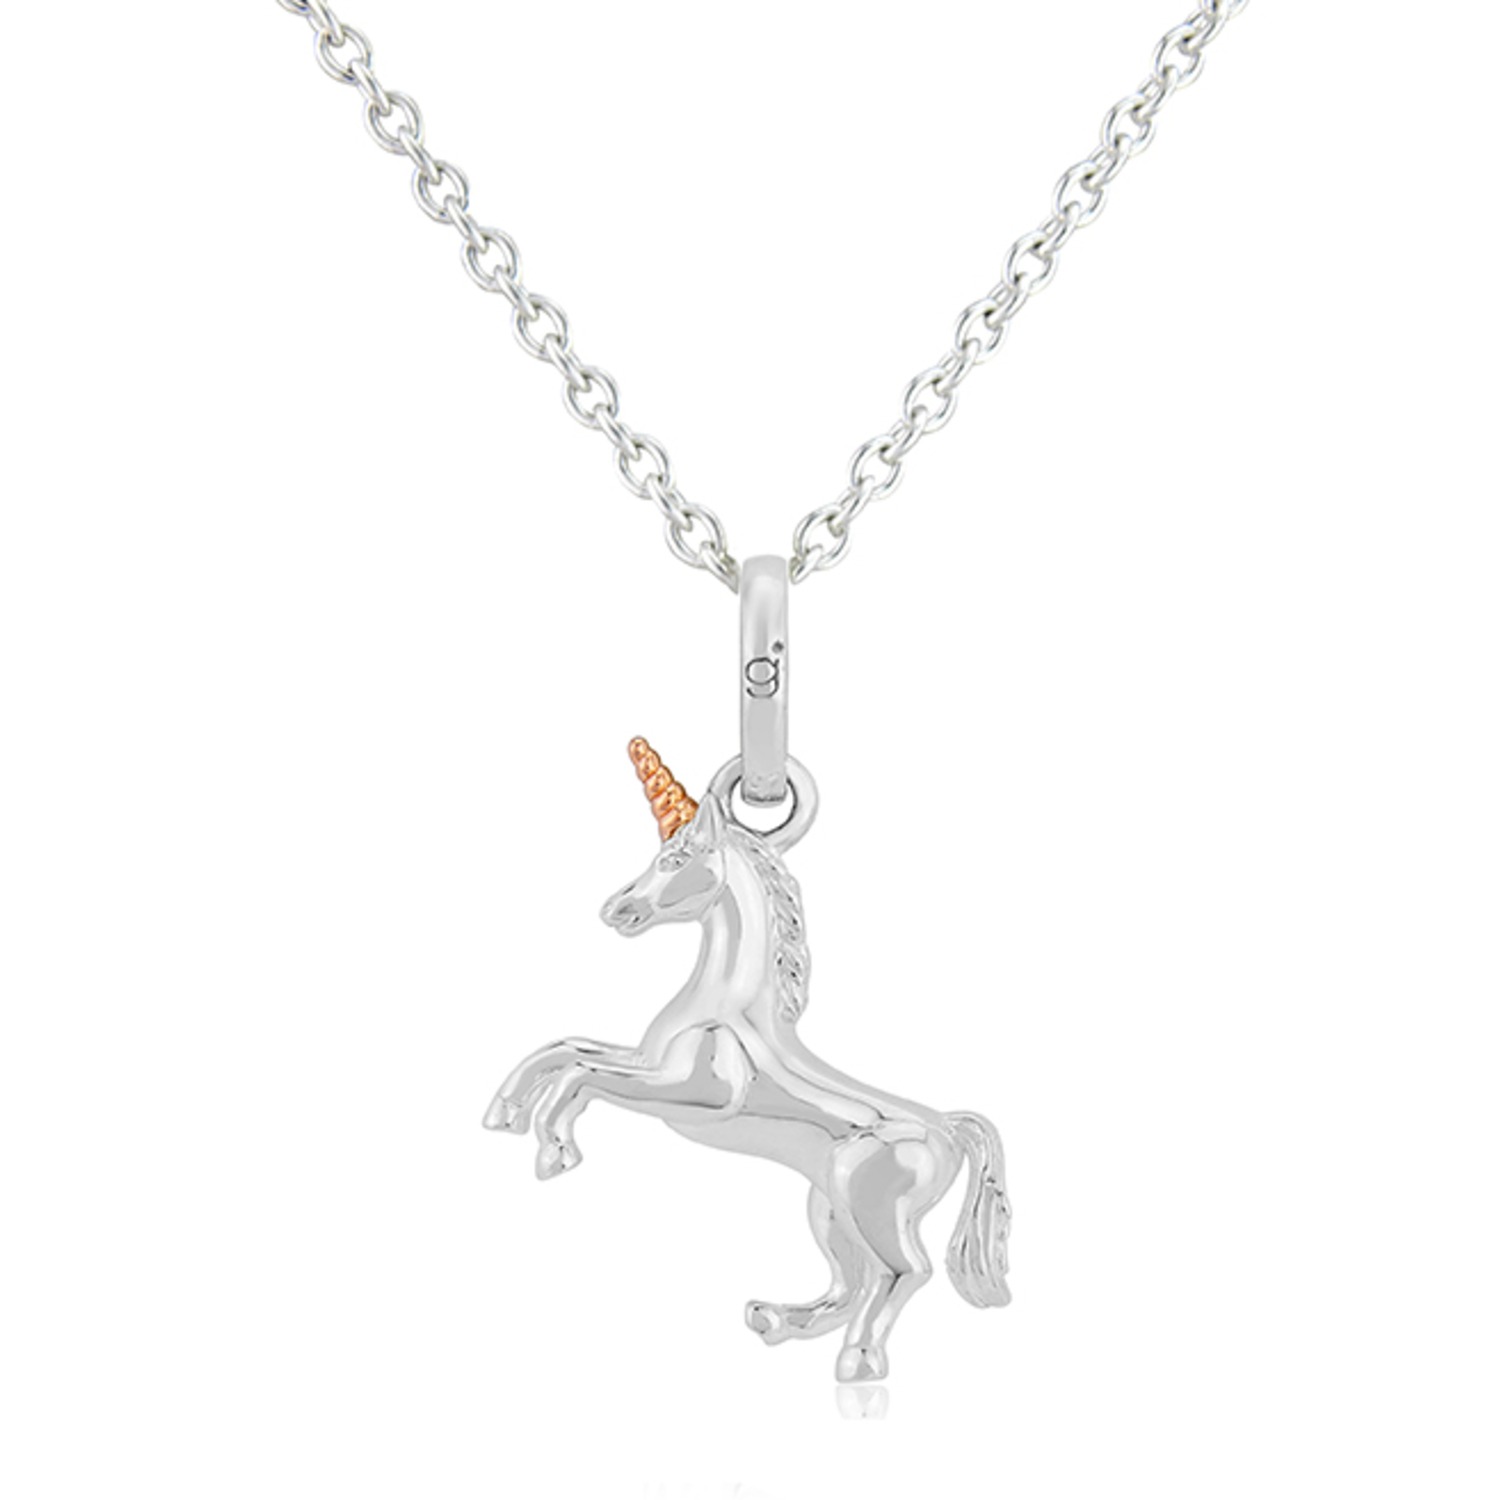 SIlver rearing unicorn pendant on a silver chain against a white background